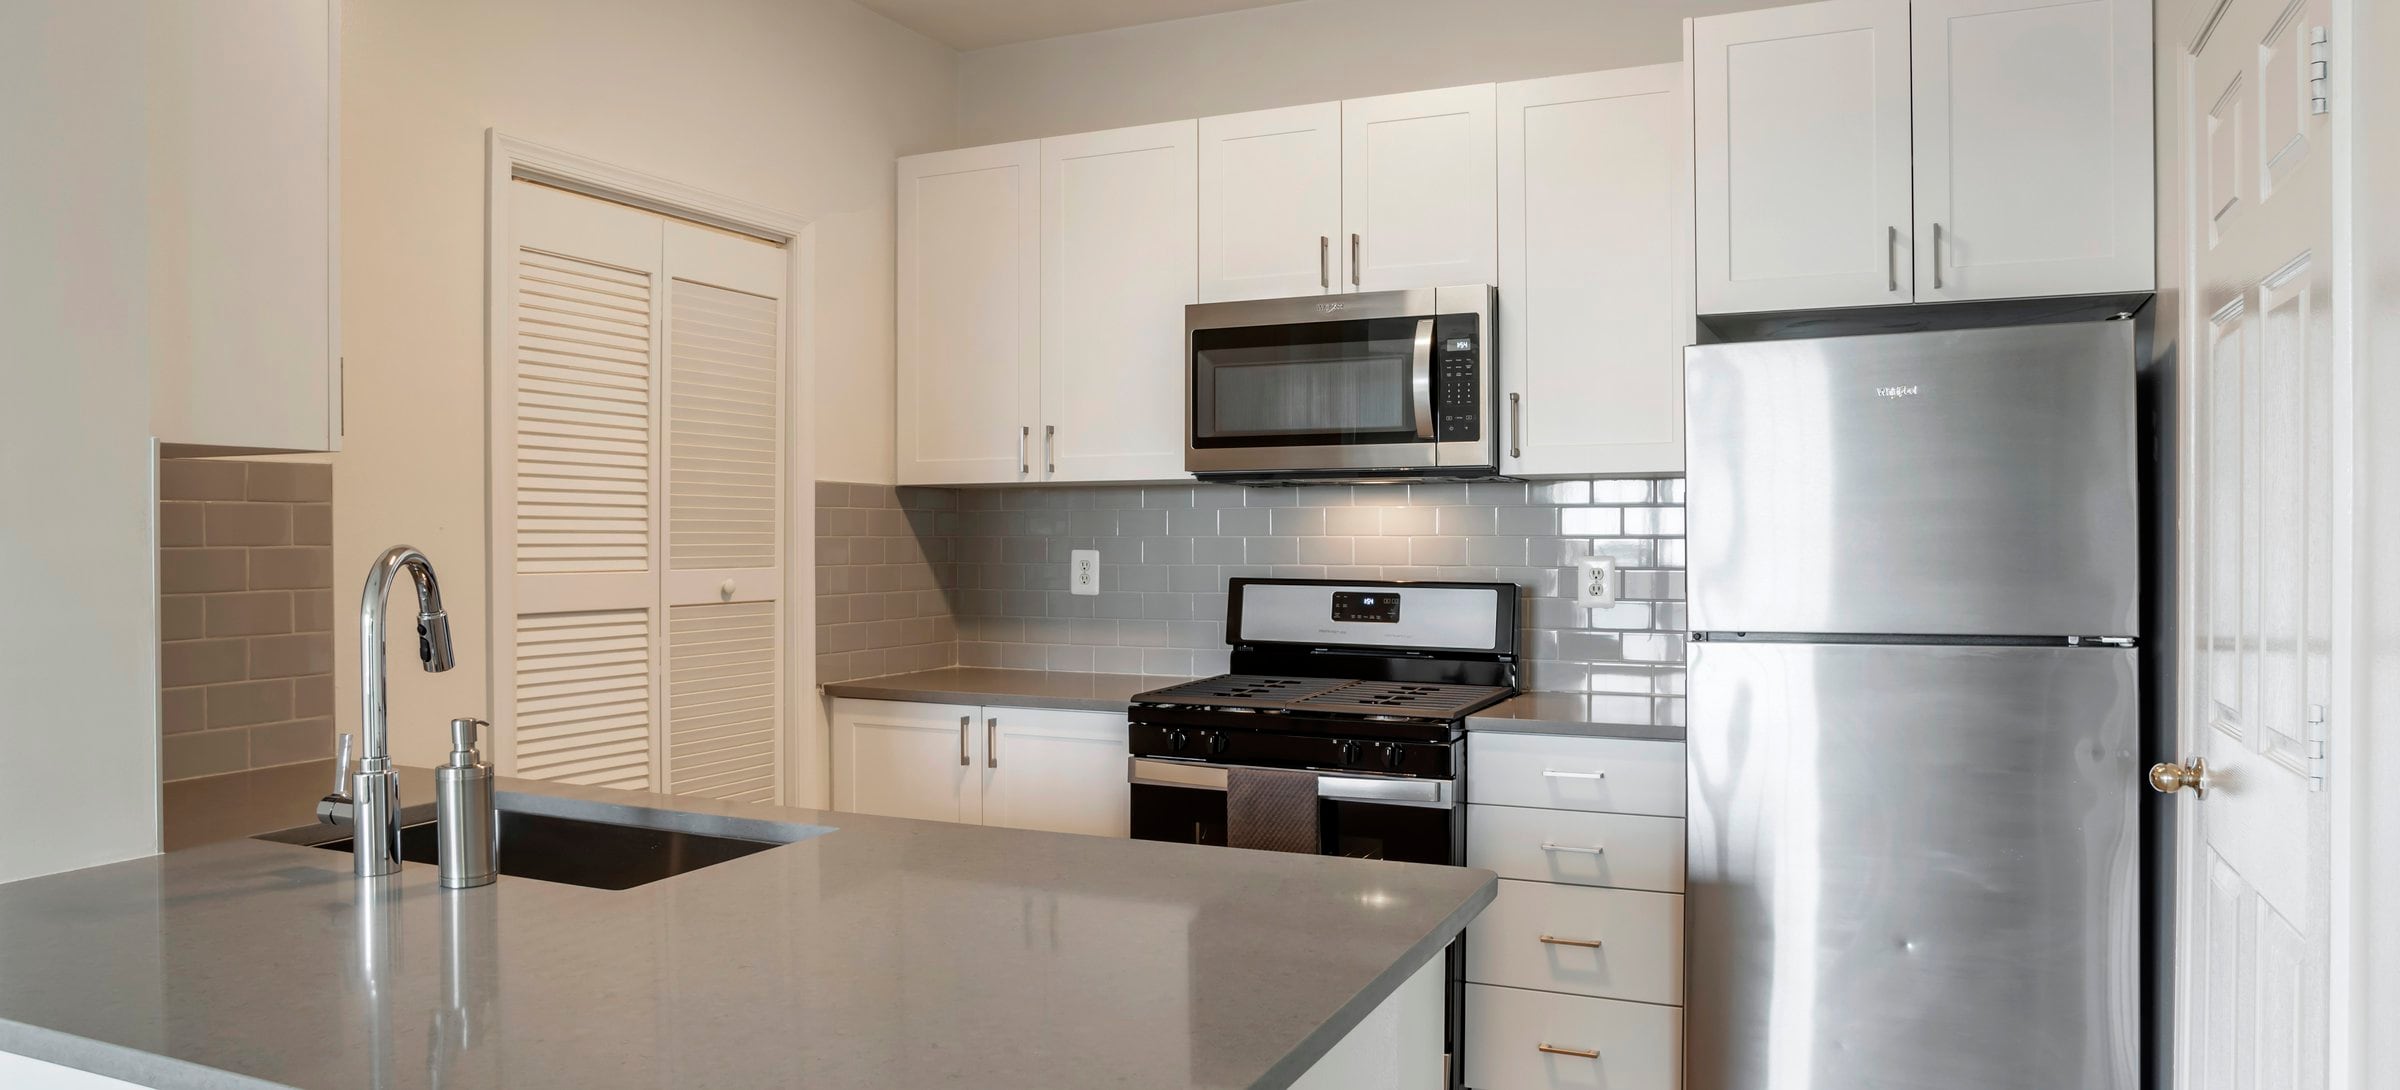 Renovated Package II kitchen with white cabinetry, grey quartz countertops, stainless steel appliances and tile backsplash